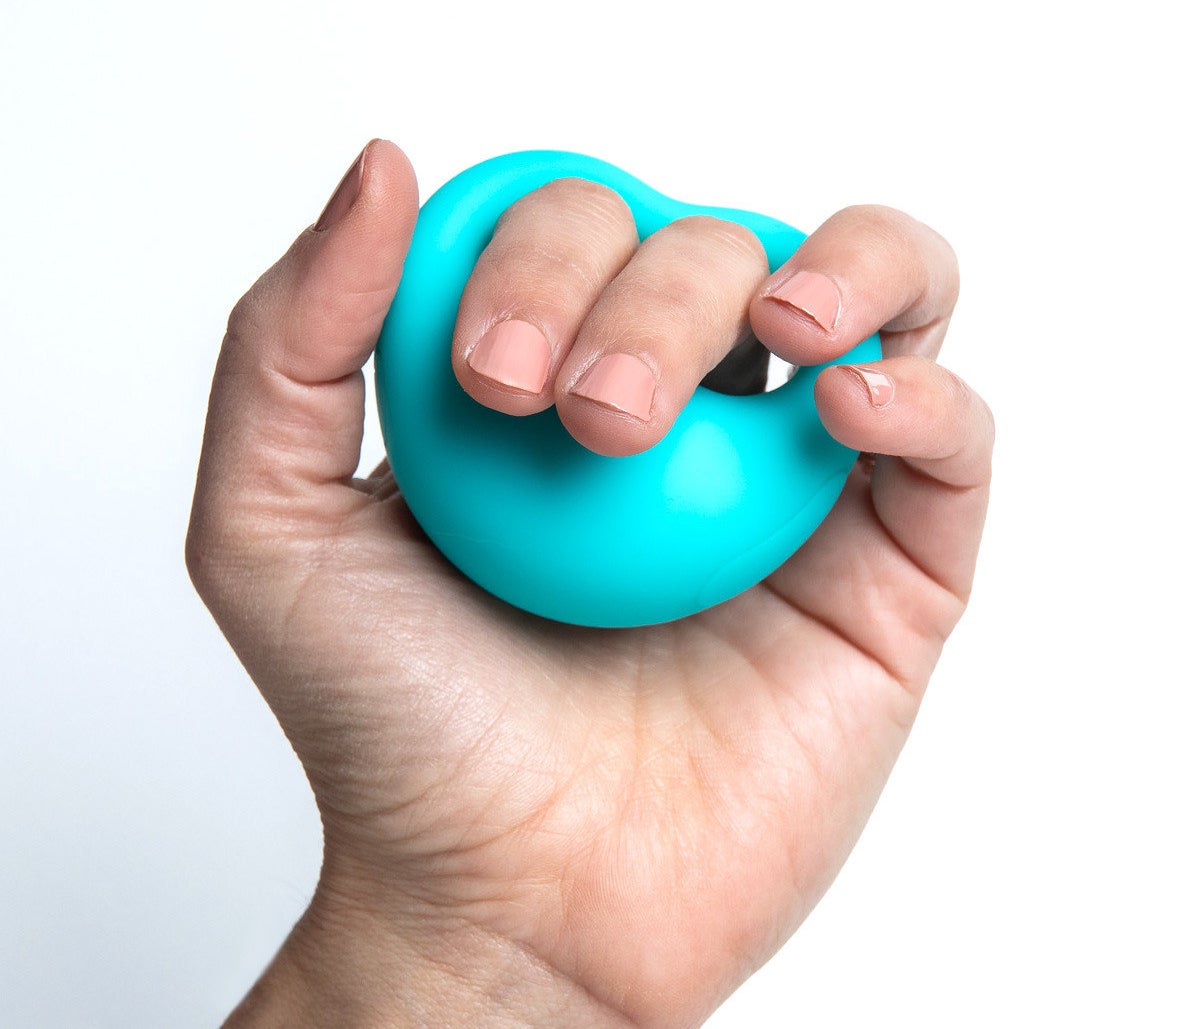 A hand holding the blue silicone toy, with the index and middle fingers inserted into the ergonomic grip